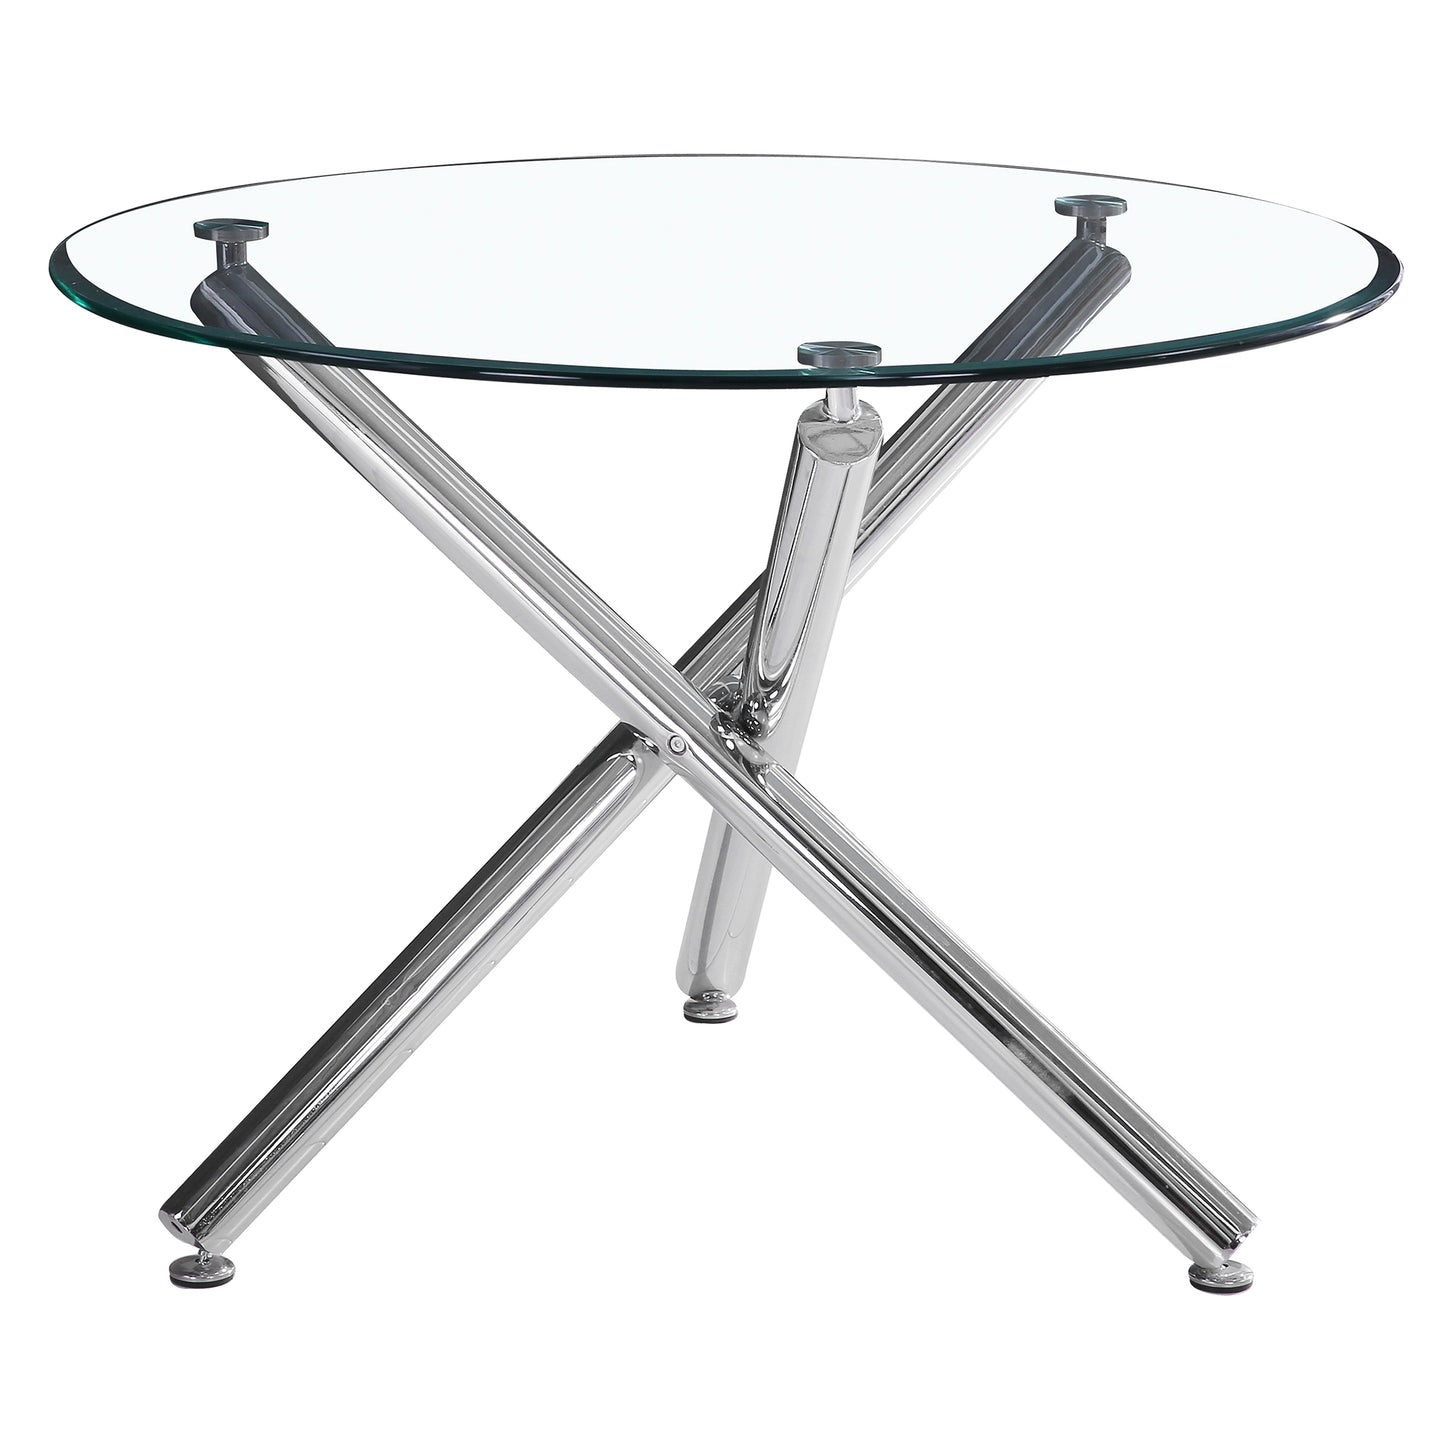 Solara/Devo Dining Set in Chrome with Grey Chair (Table + 4 Chairs)